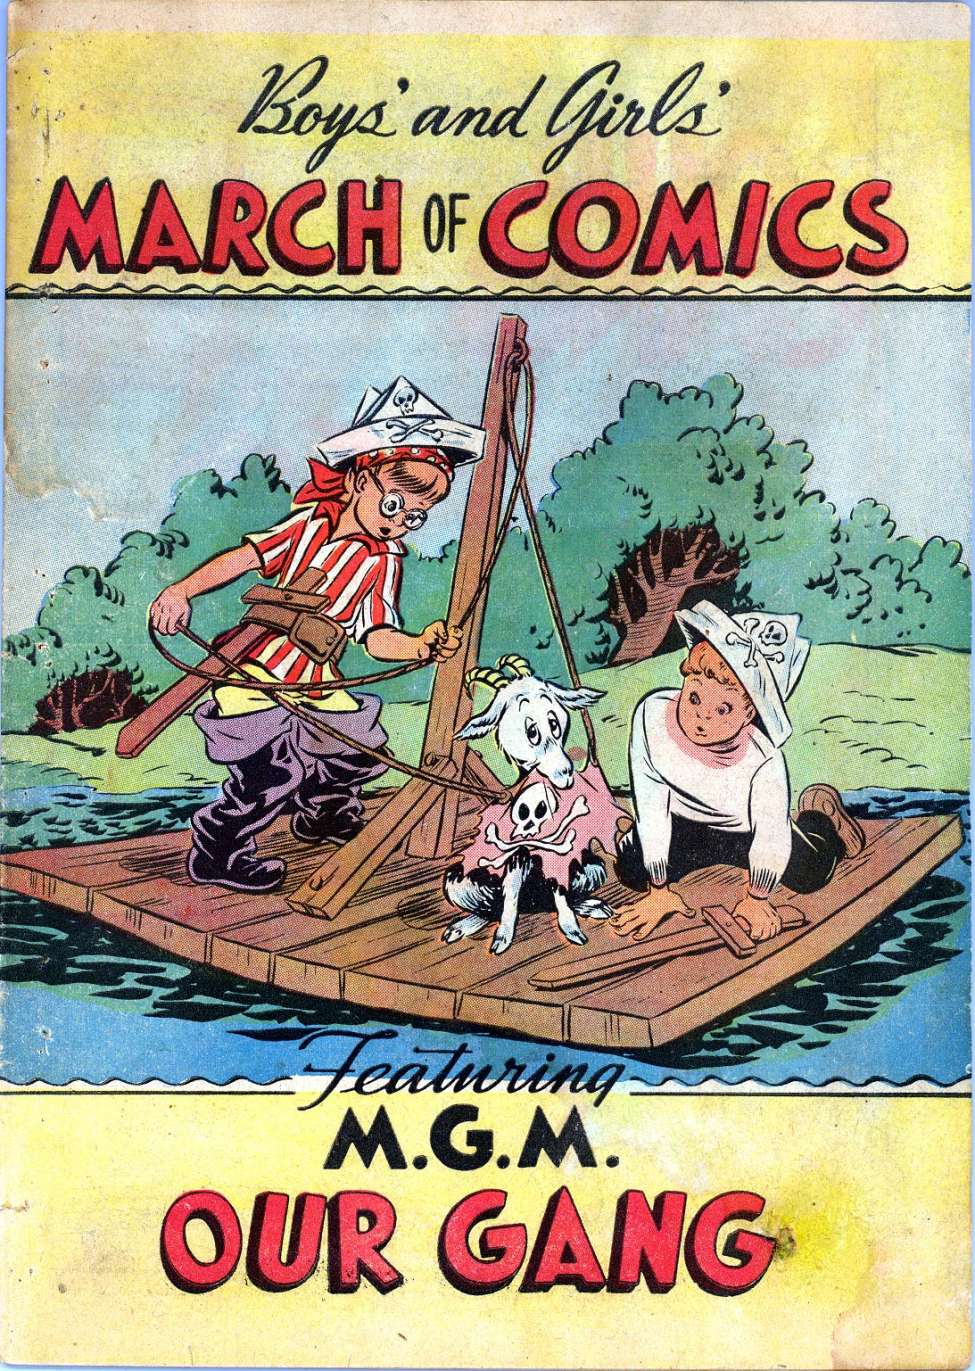 Comic Book Cover For March of Comics 26 - Featuring M.G.M Our Gang